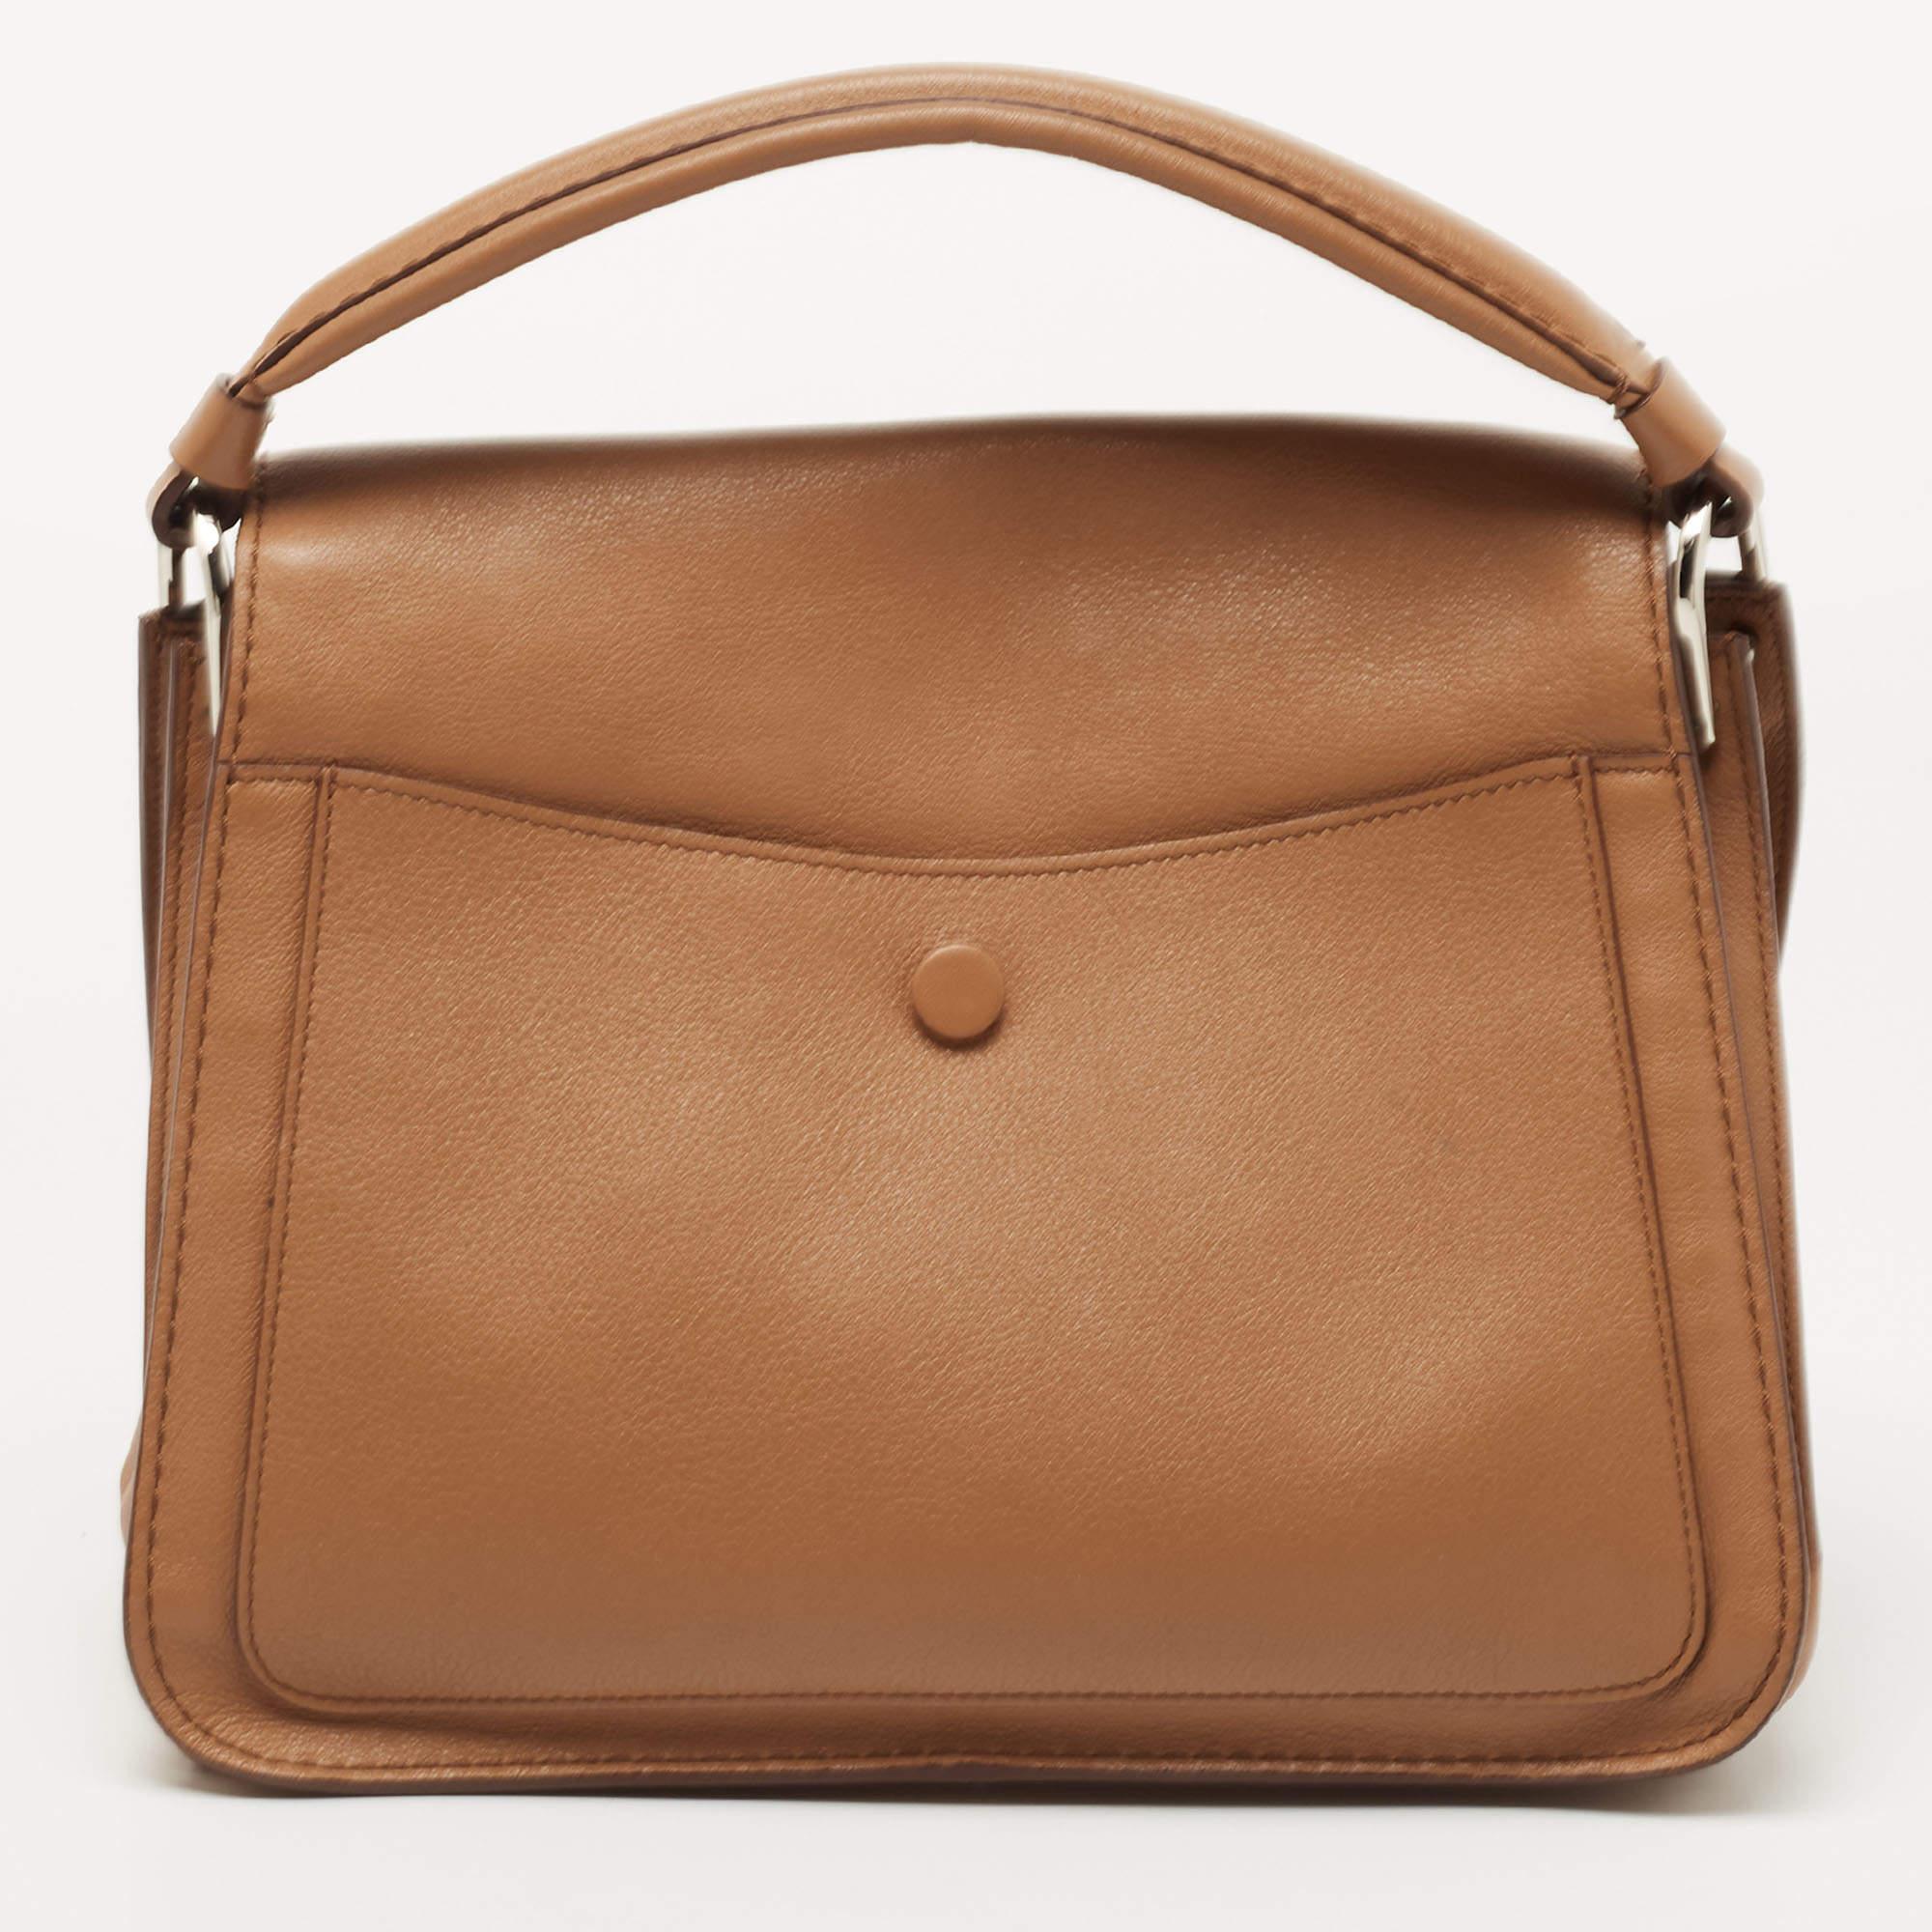 Simple details, high quality, and everyday convenience mark this designer bag for women by Tod's. The bag is sewn with skill to deliver a refined look and an impeccable finish.

Includes: Detachable Strap
